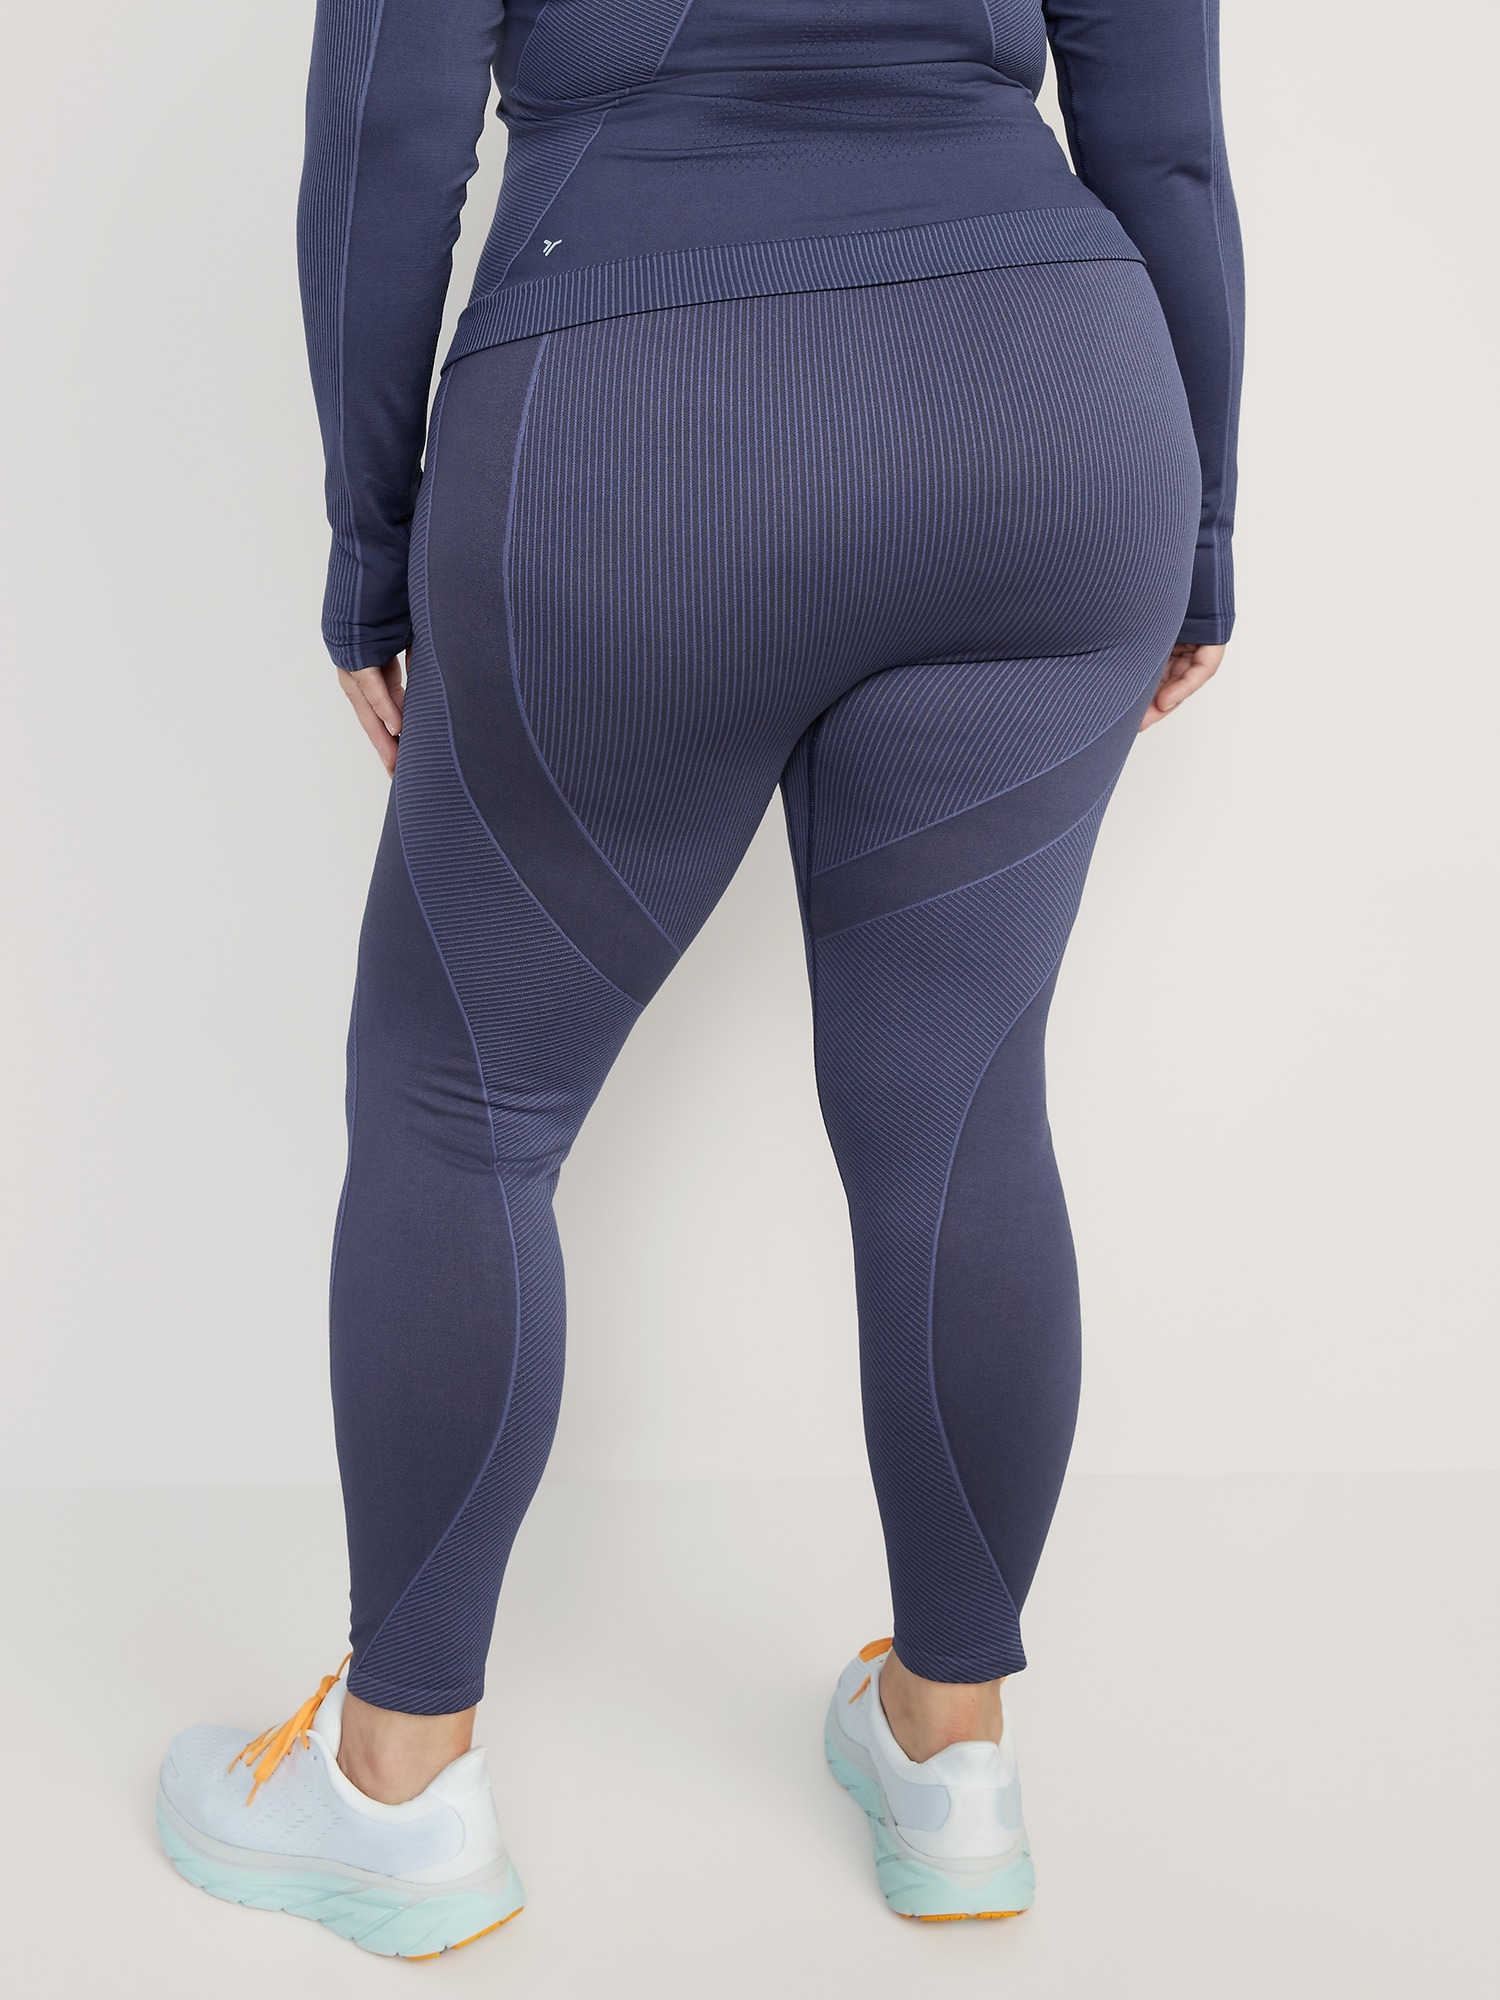 Navy Ribbed Leggings with Pockets – Brutal London Clothing